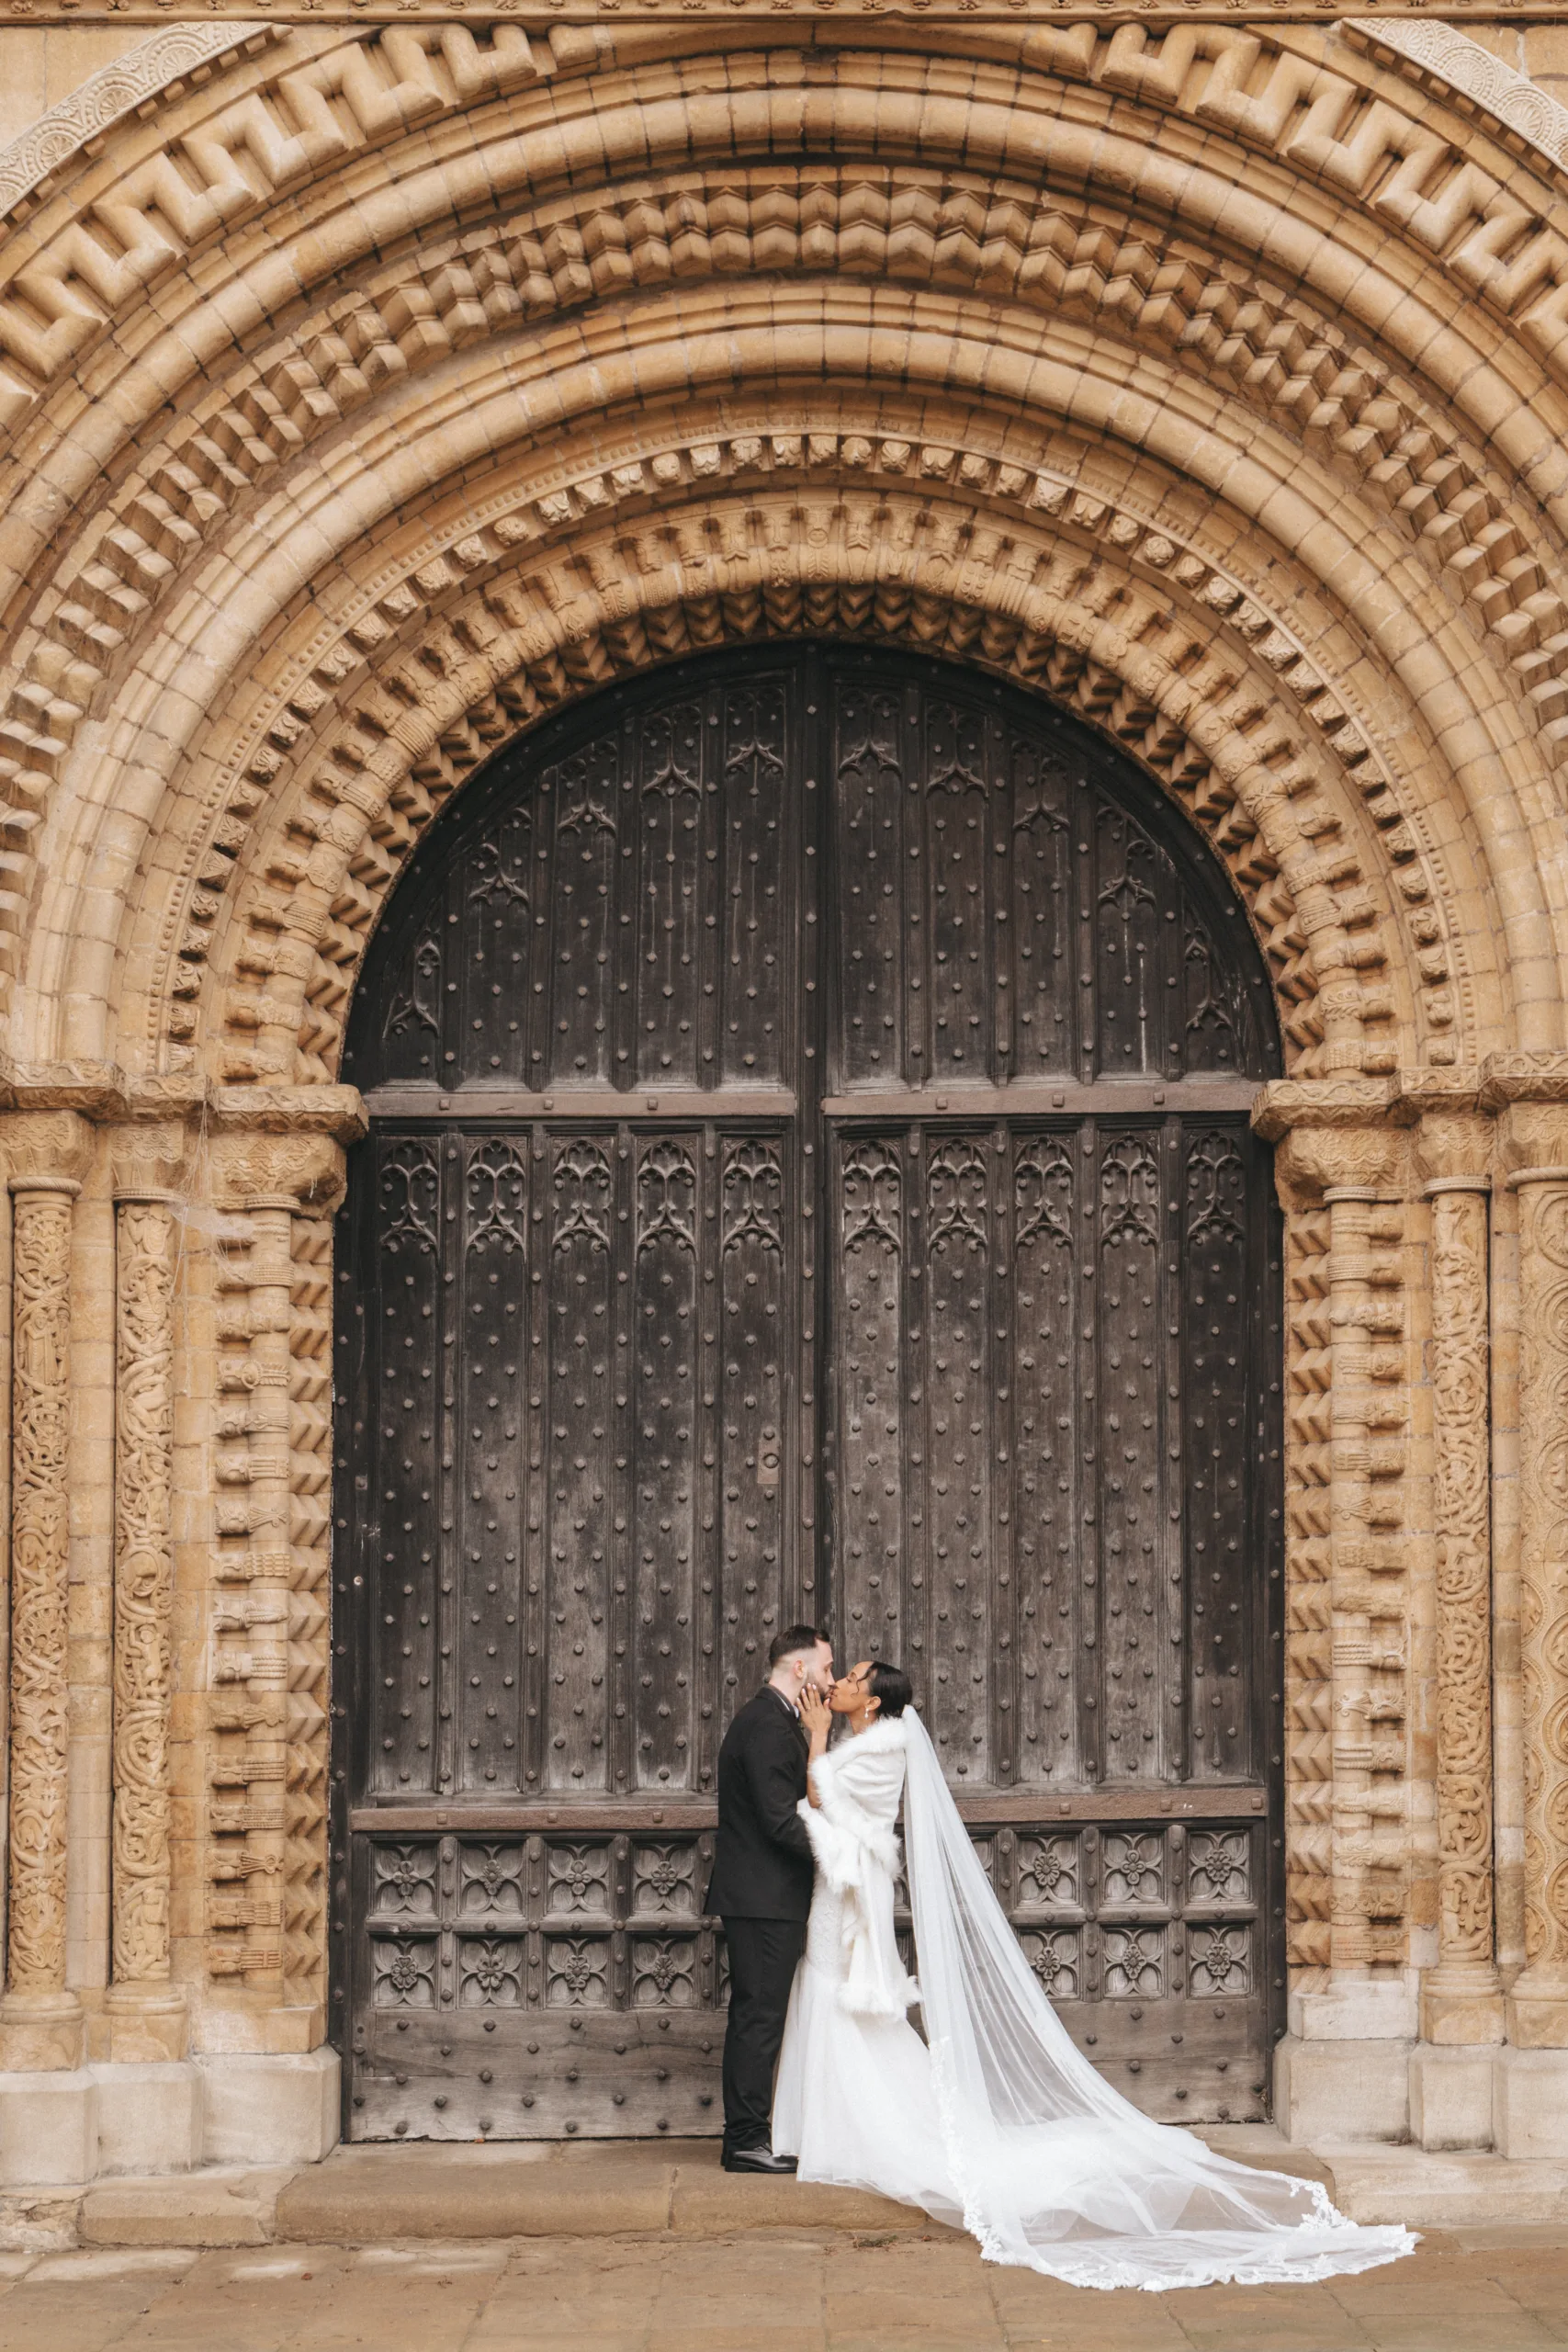 A wedding couple kissing in front of an ornate door, captured by a photographer.